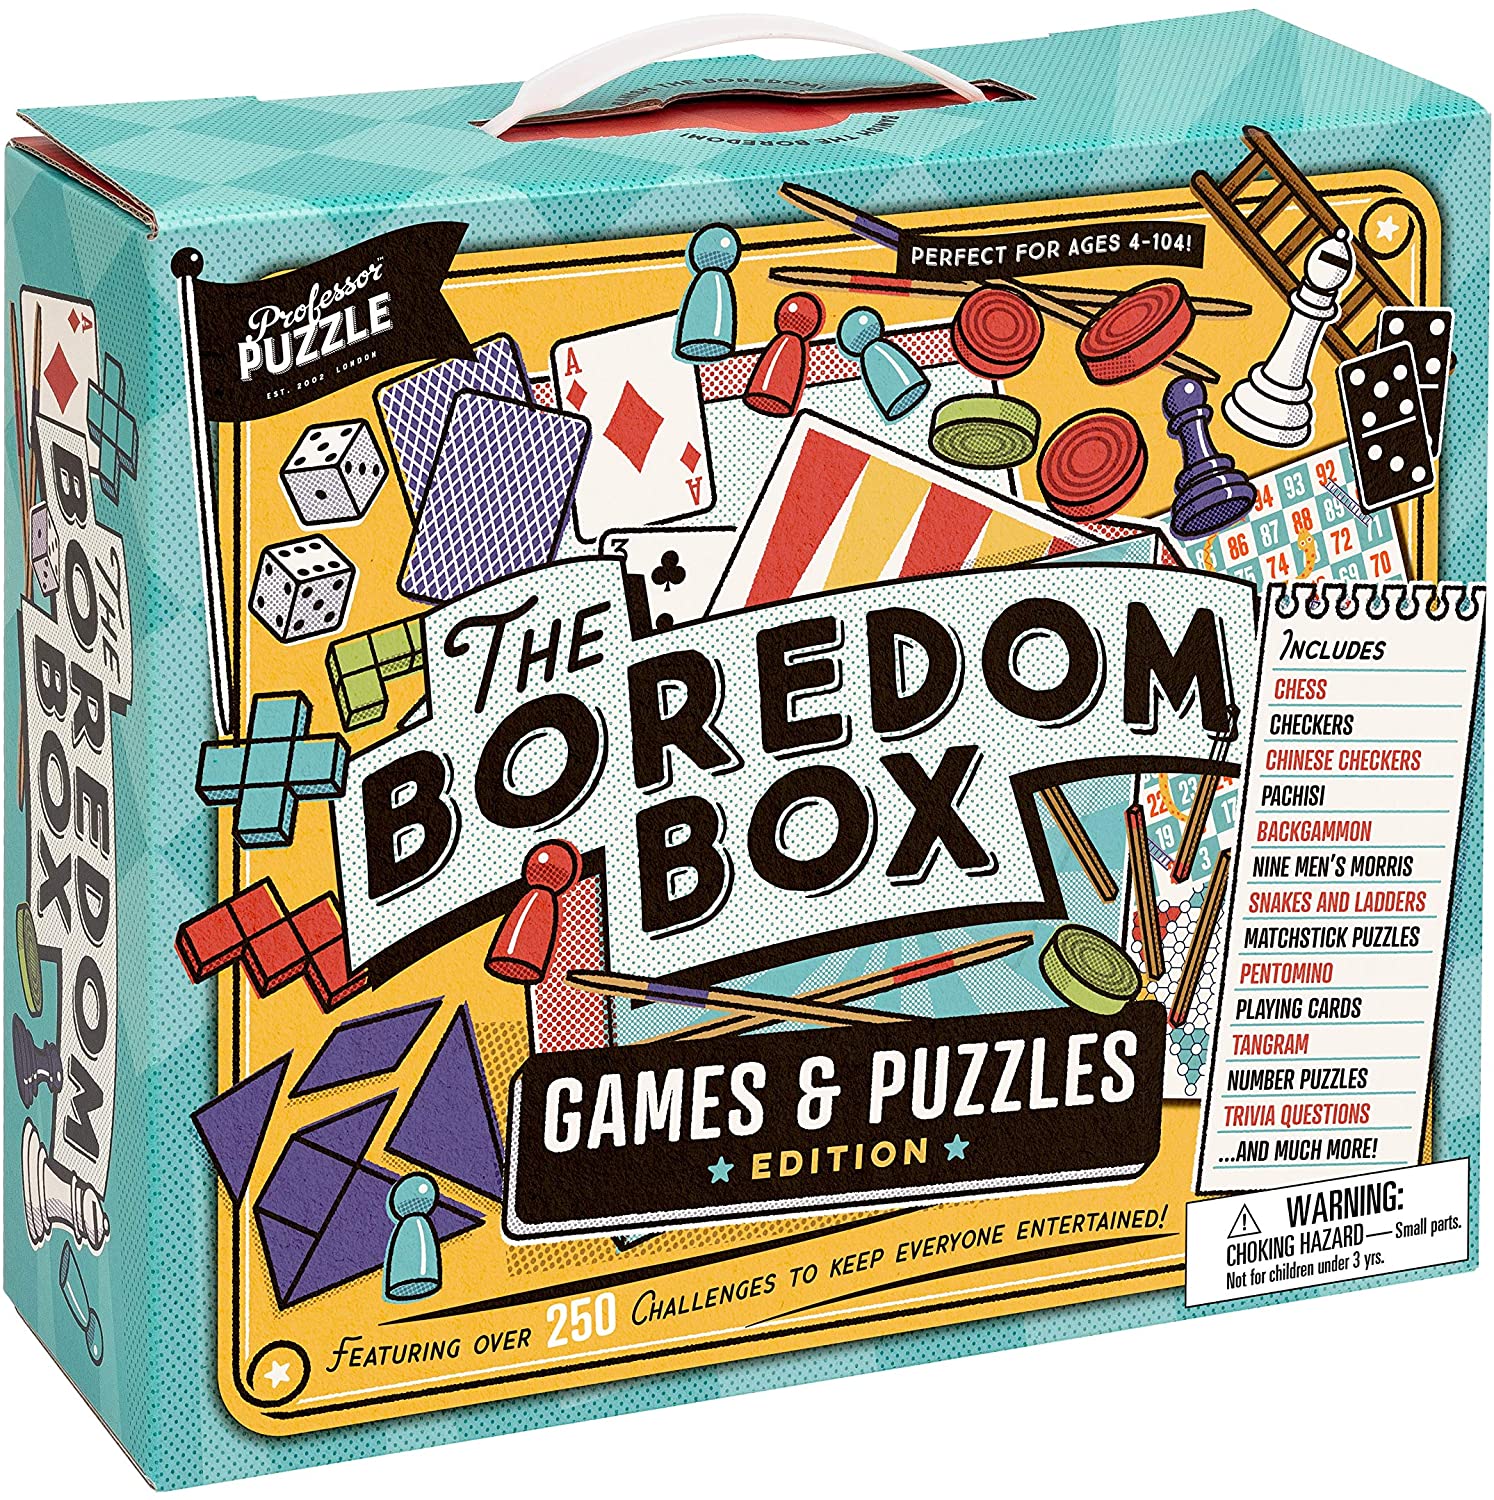 Professor Puzzle  THE BOREDOM BOX - Huge Games & Puzzles Set - Over 250 Activities from Classic Board Games to lateral Thinking Puzzles | Brain Train Indoor Games for Kids, Family, Friends|Game Night